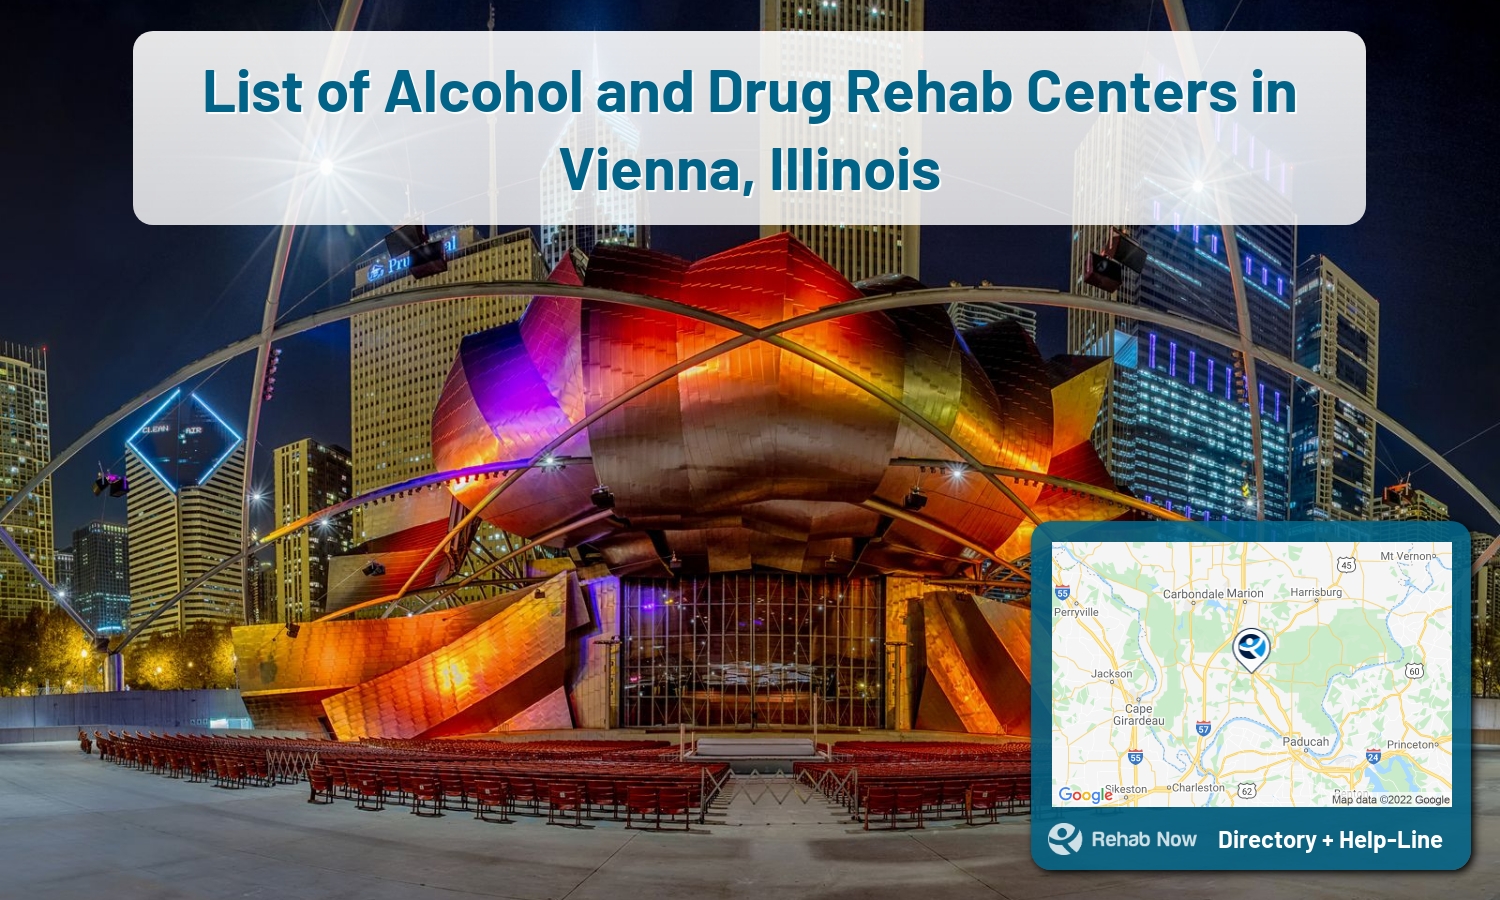 Our experts can help you find treatment now in Vienna, Illinois. We list drug rehab and alcohol centers in Illinois.